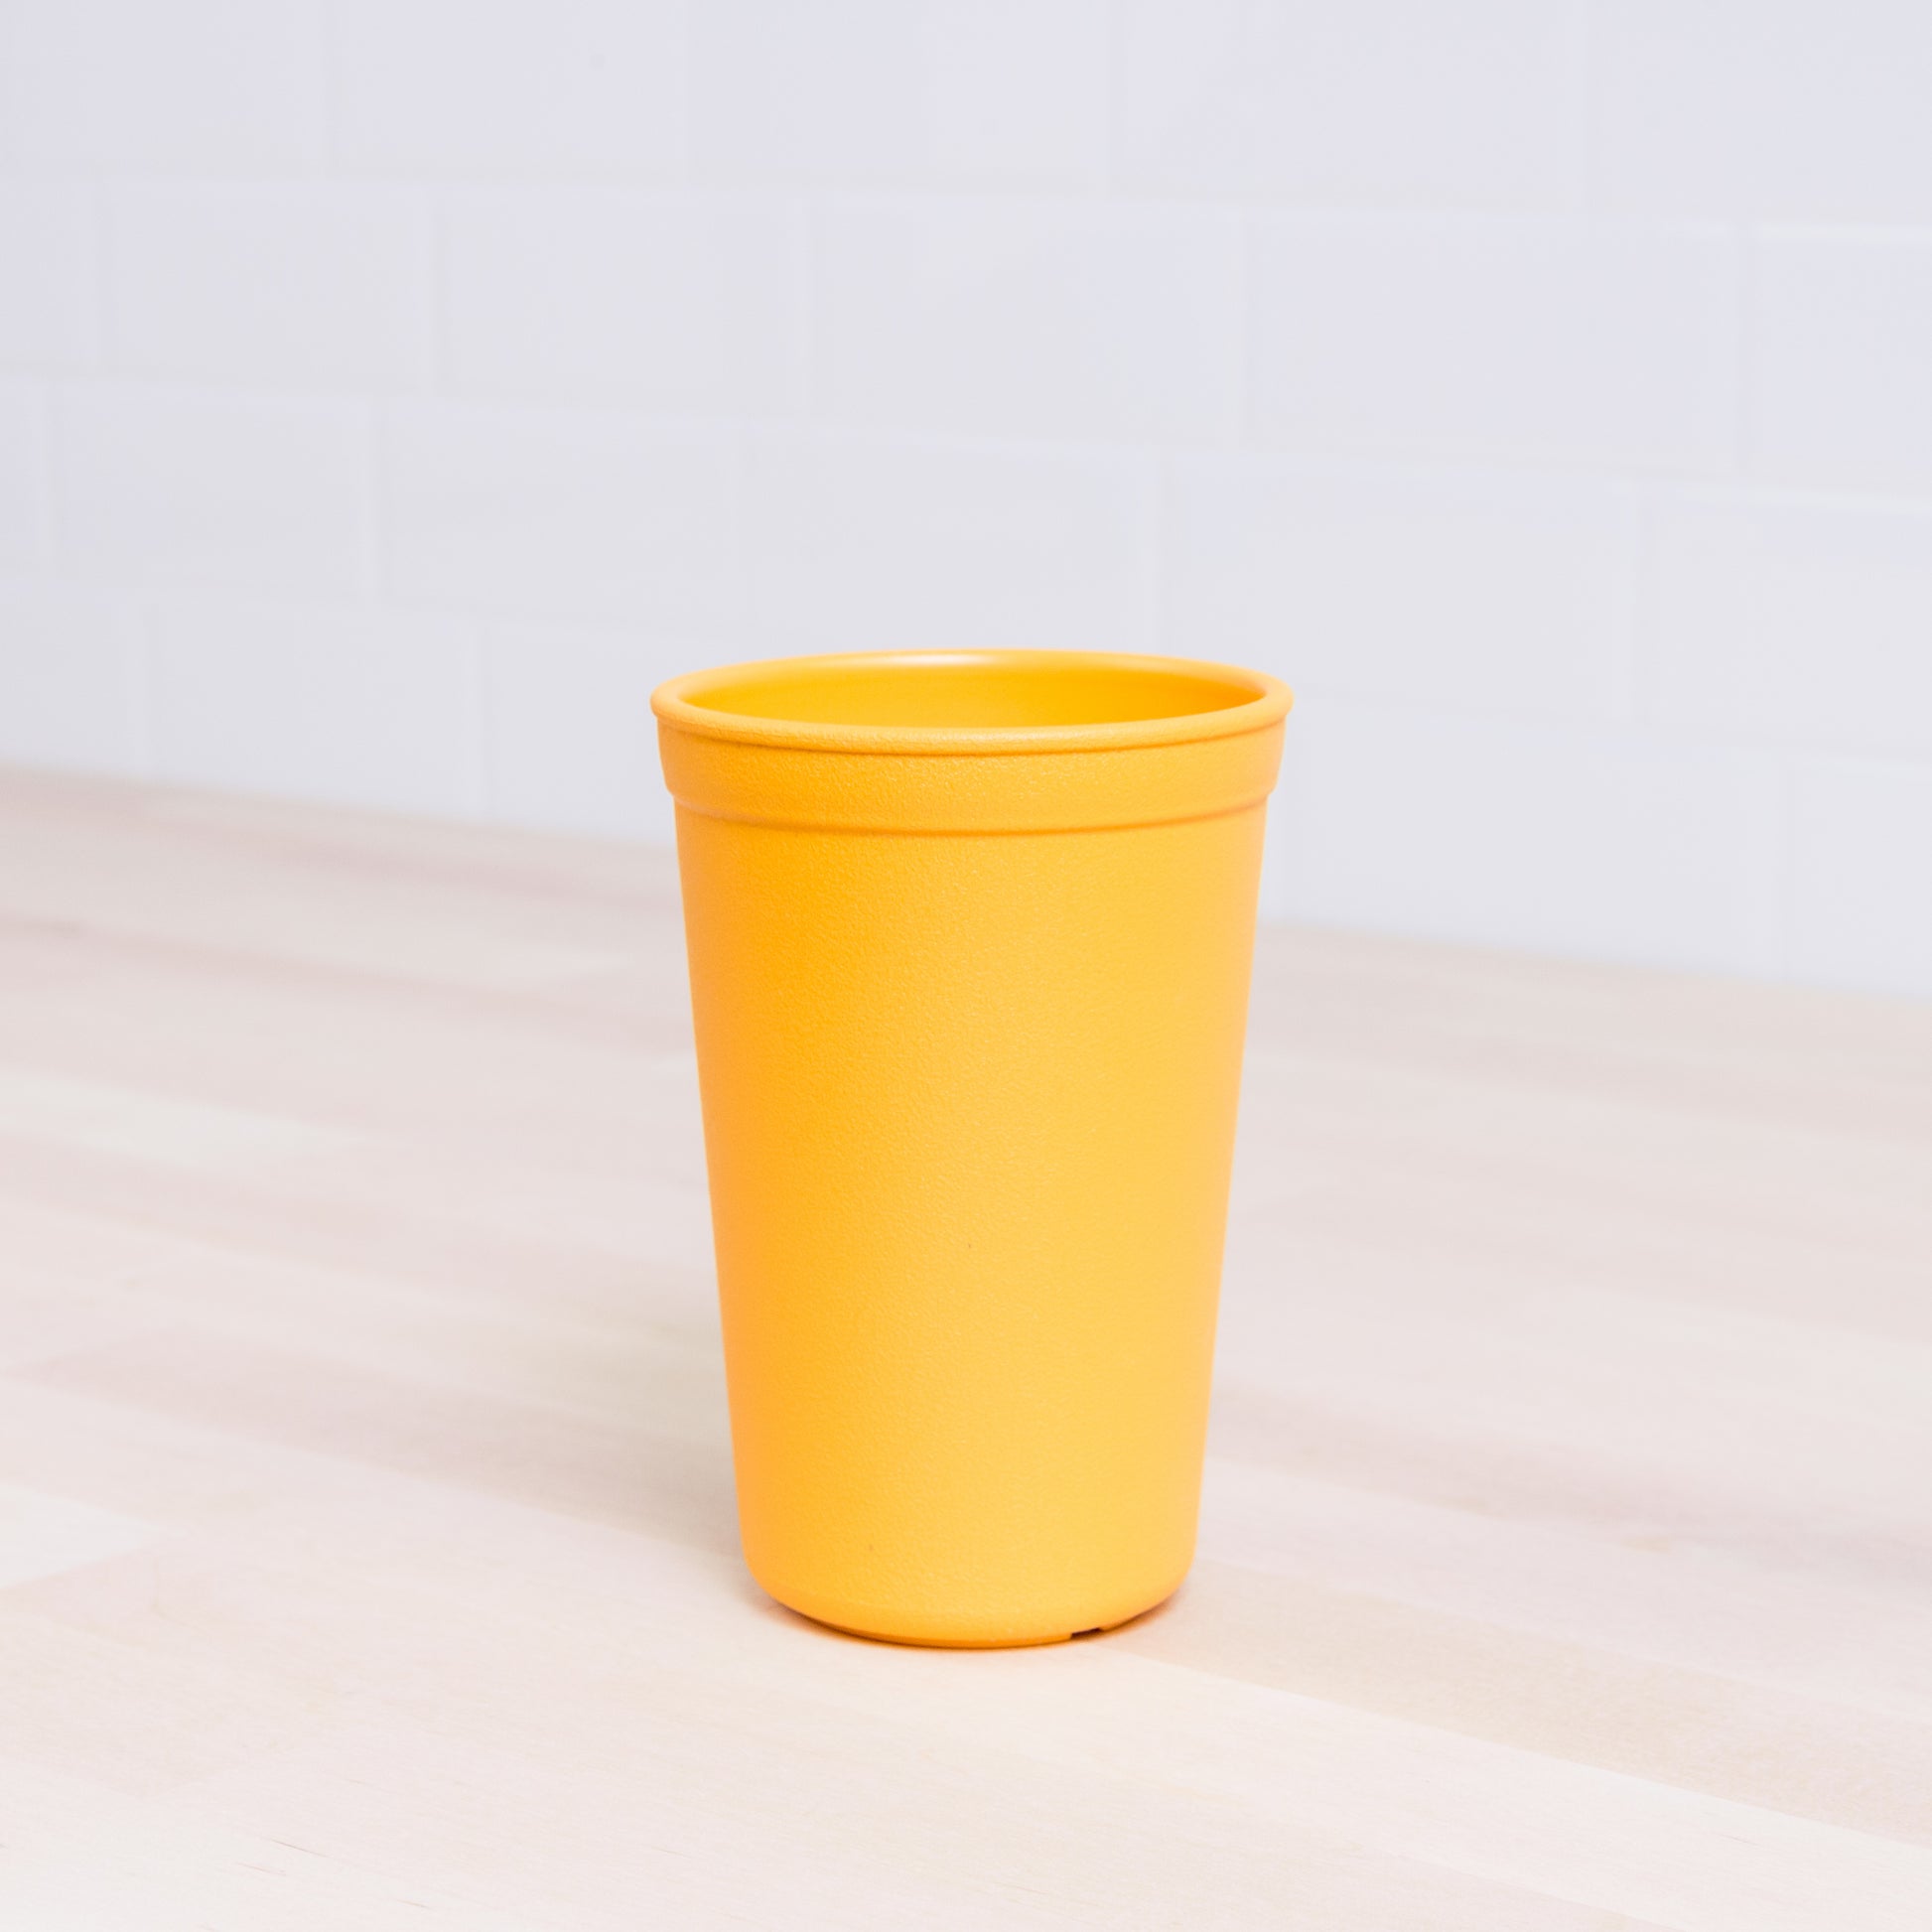 Re-Play Tumbler in Sunny Yellow from Bear & Moo